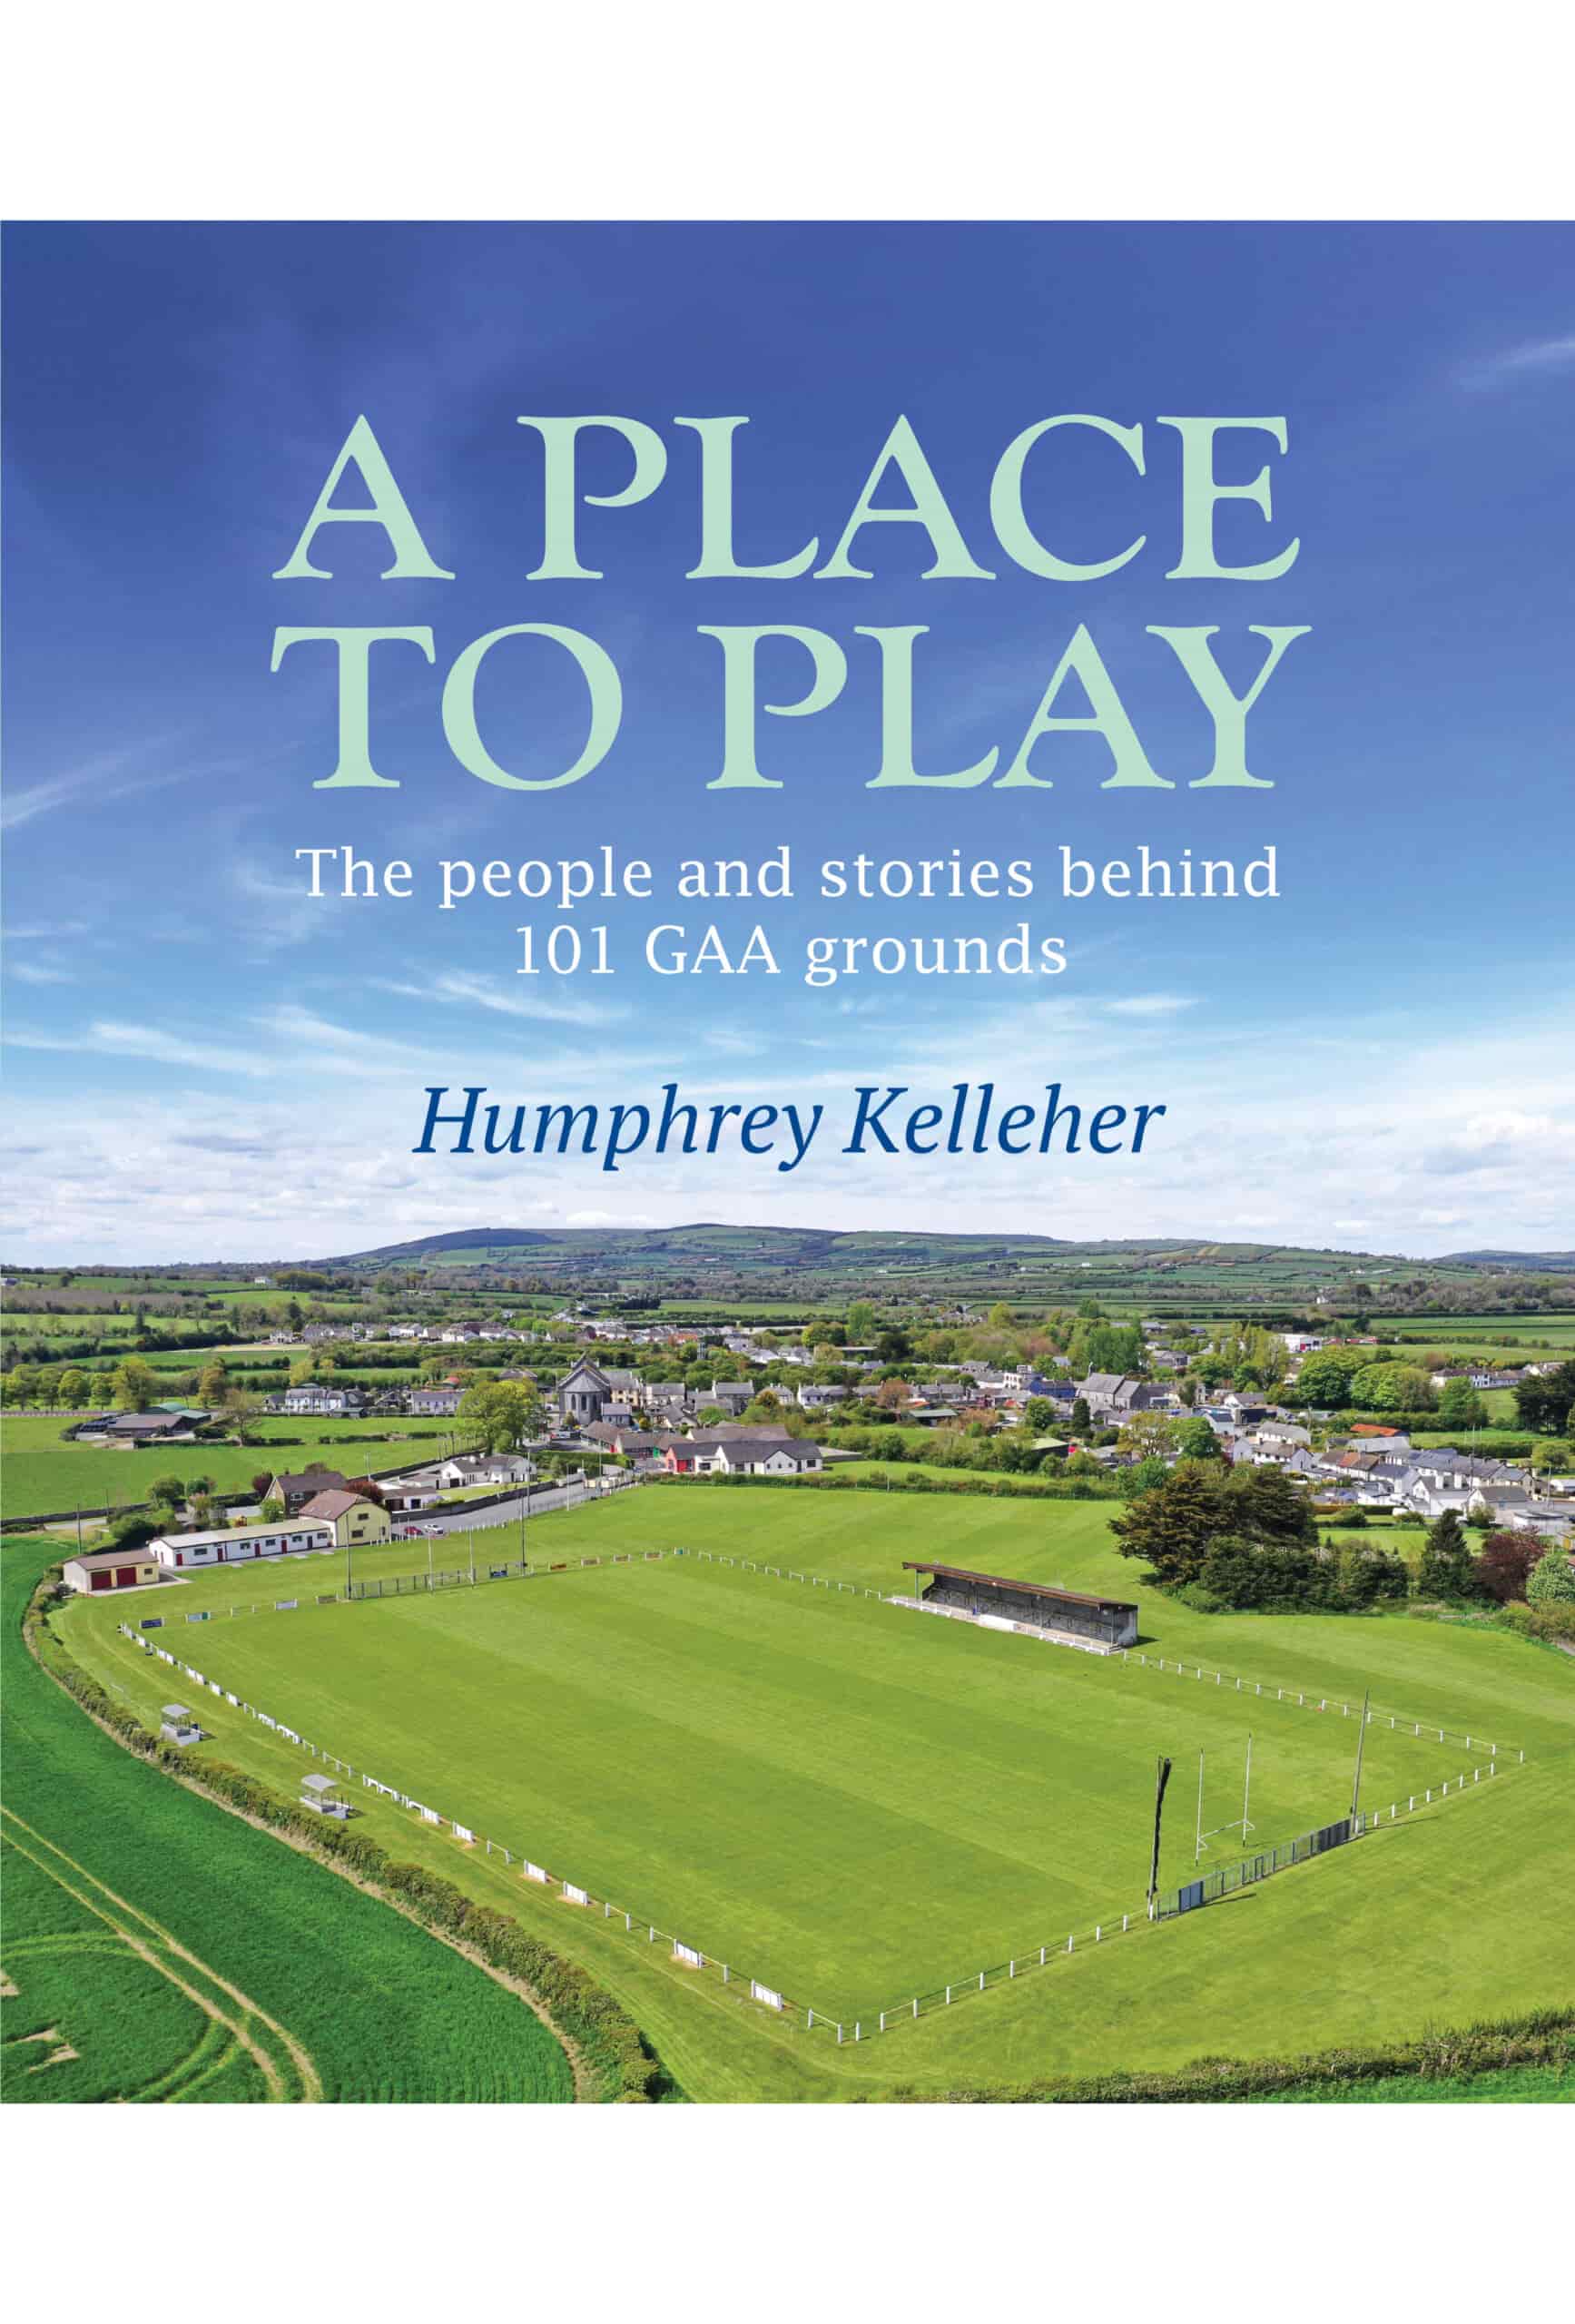 A place to play : the people and stories behind 101 GAA grounds summary image